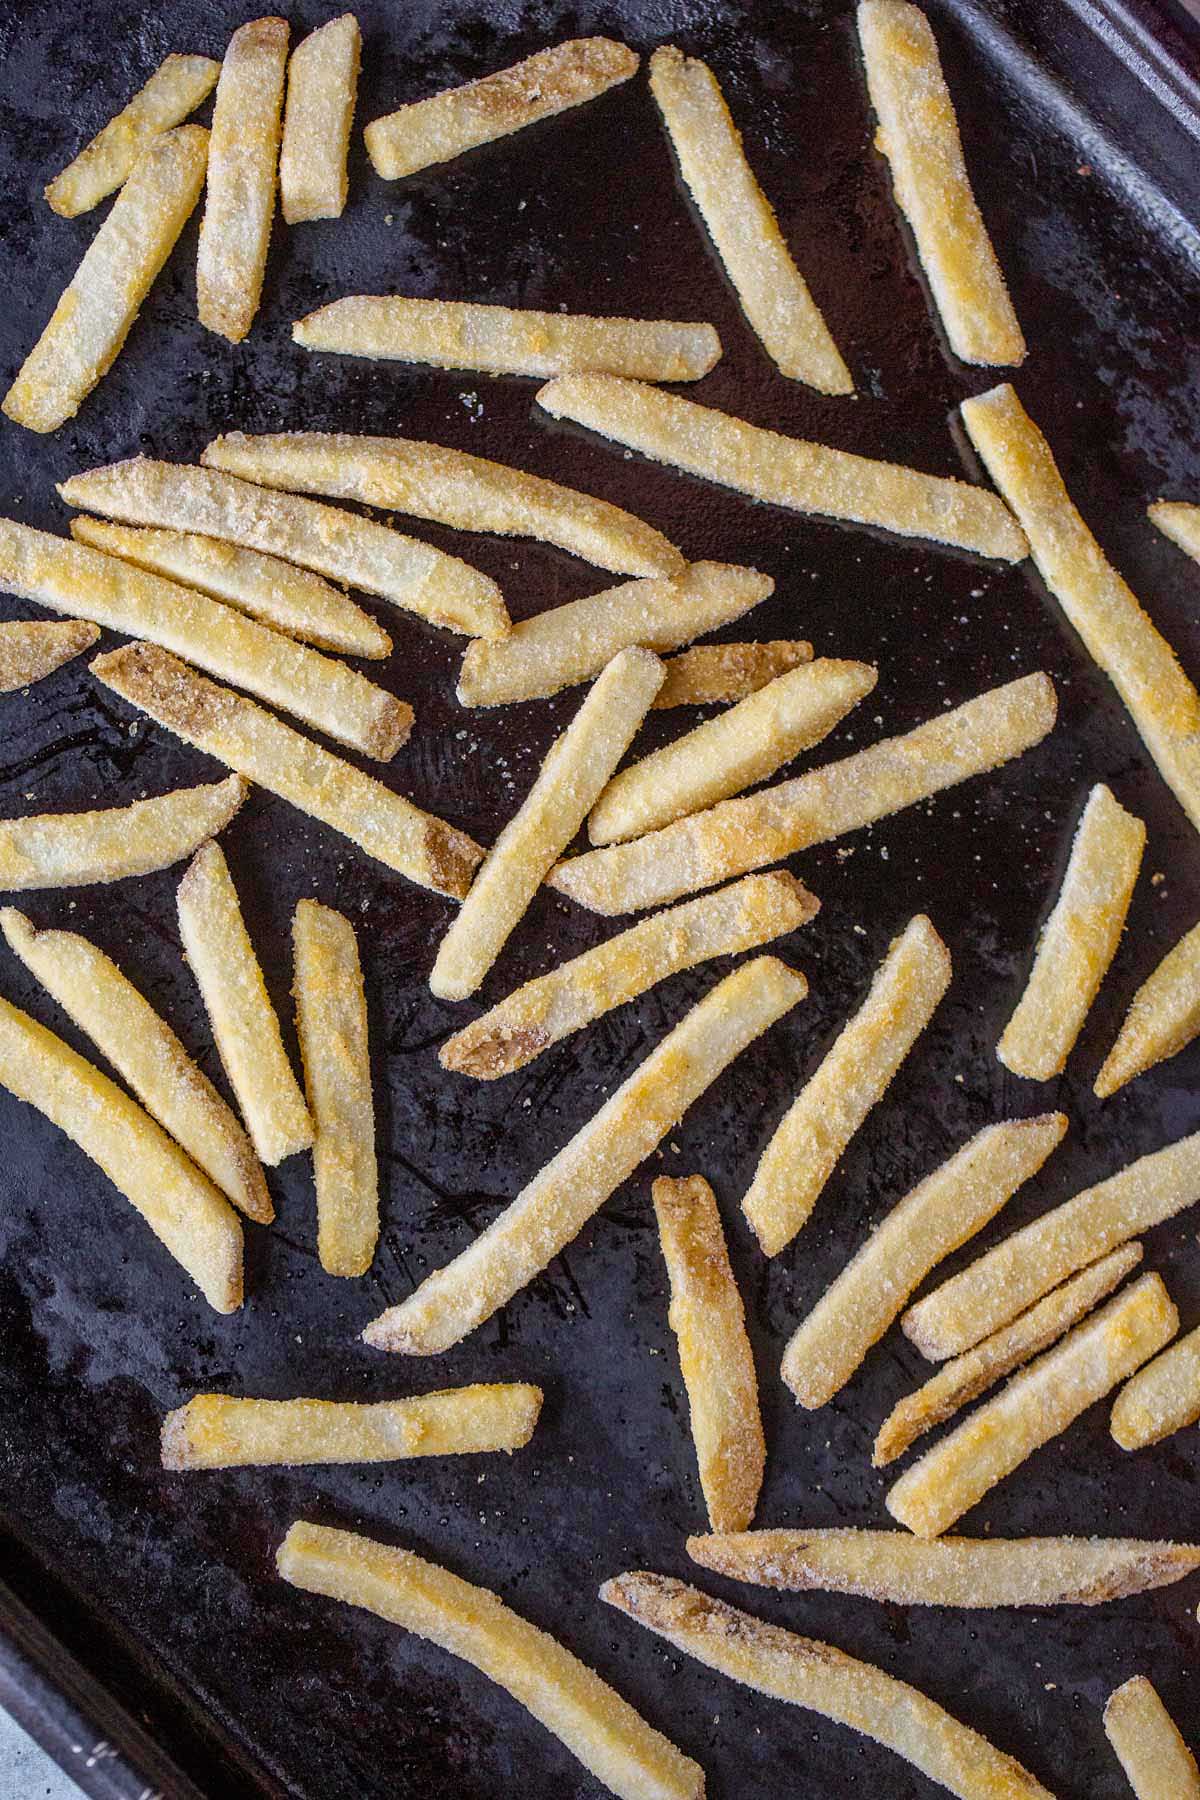 Baked french fries on a sheet pan.